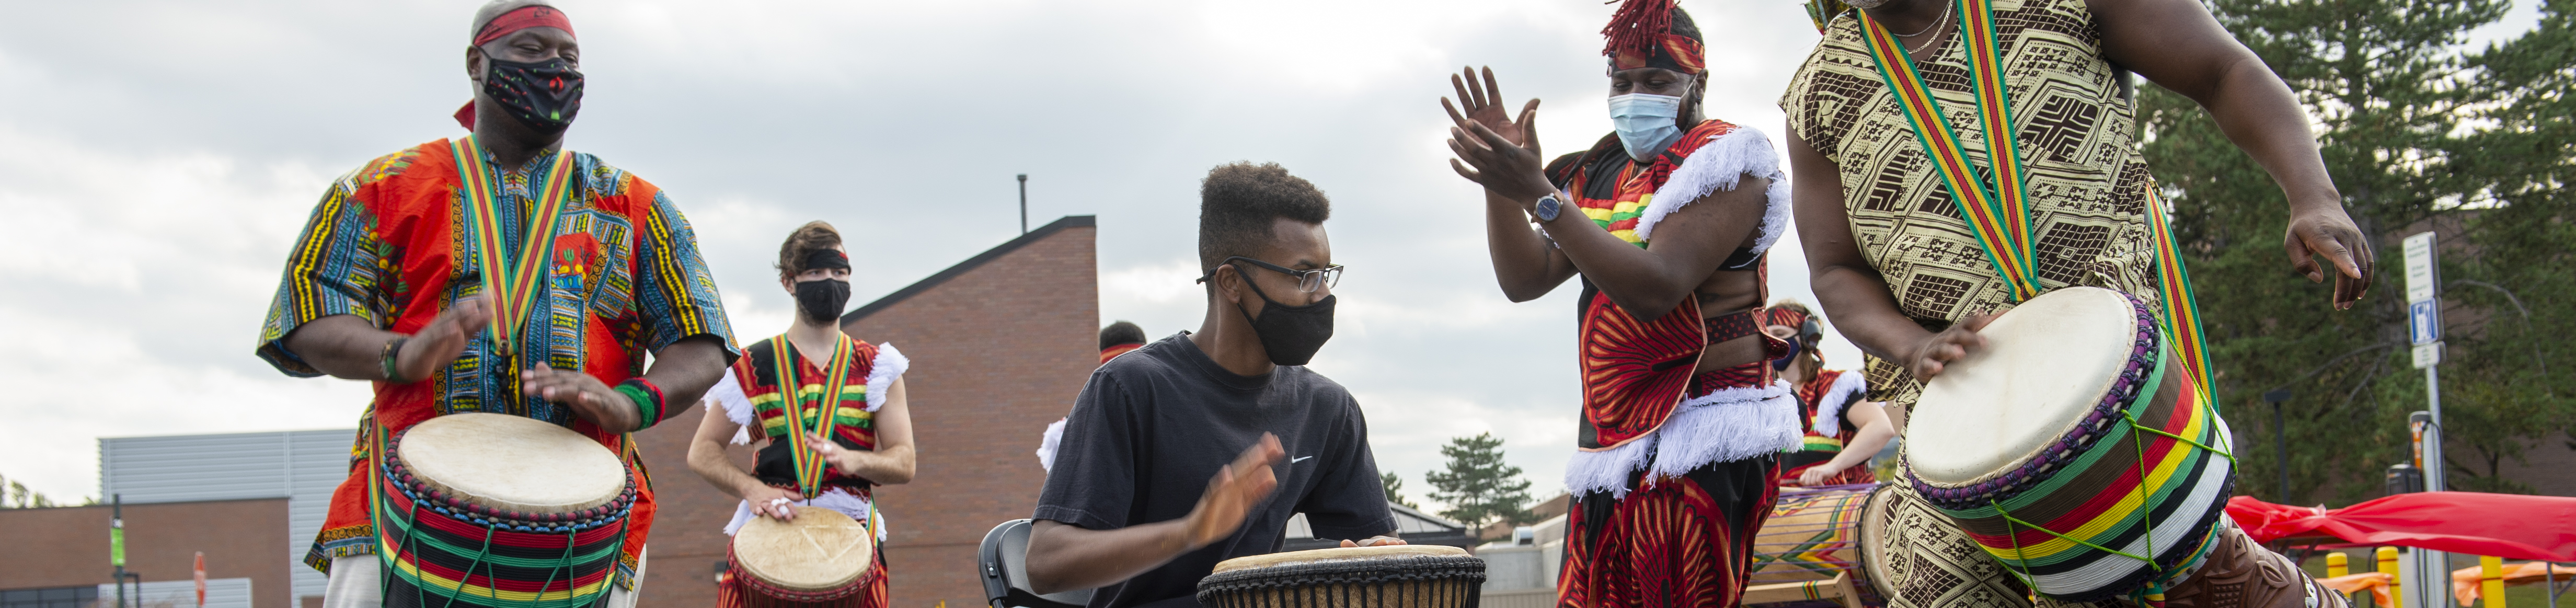 African drumming on campus